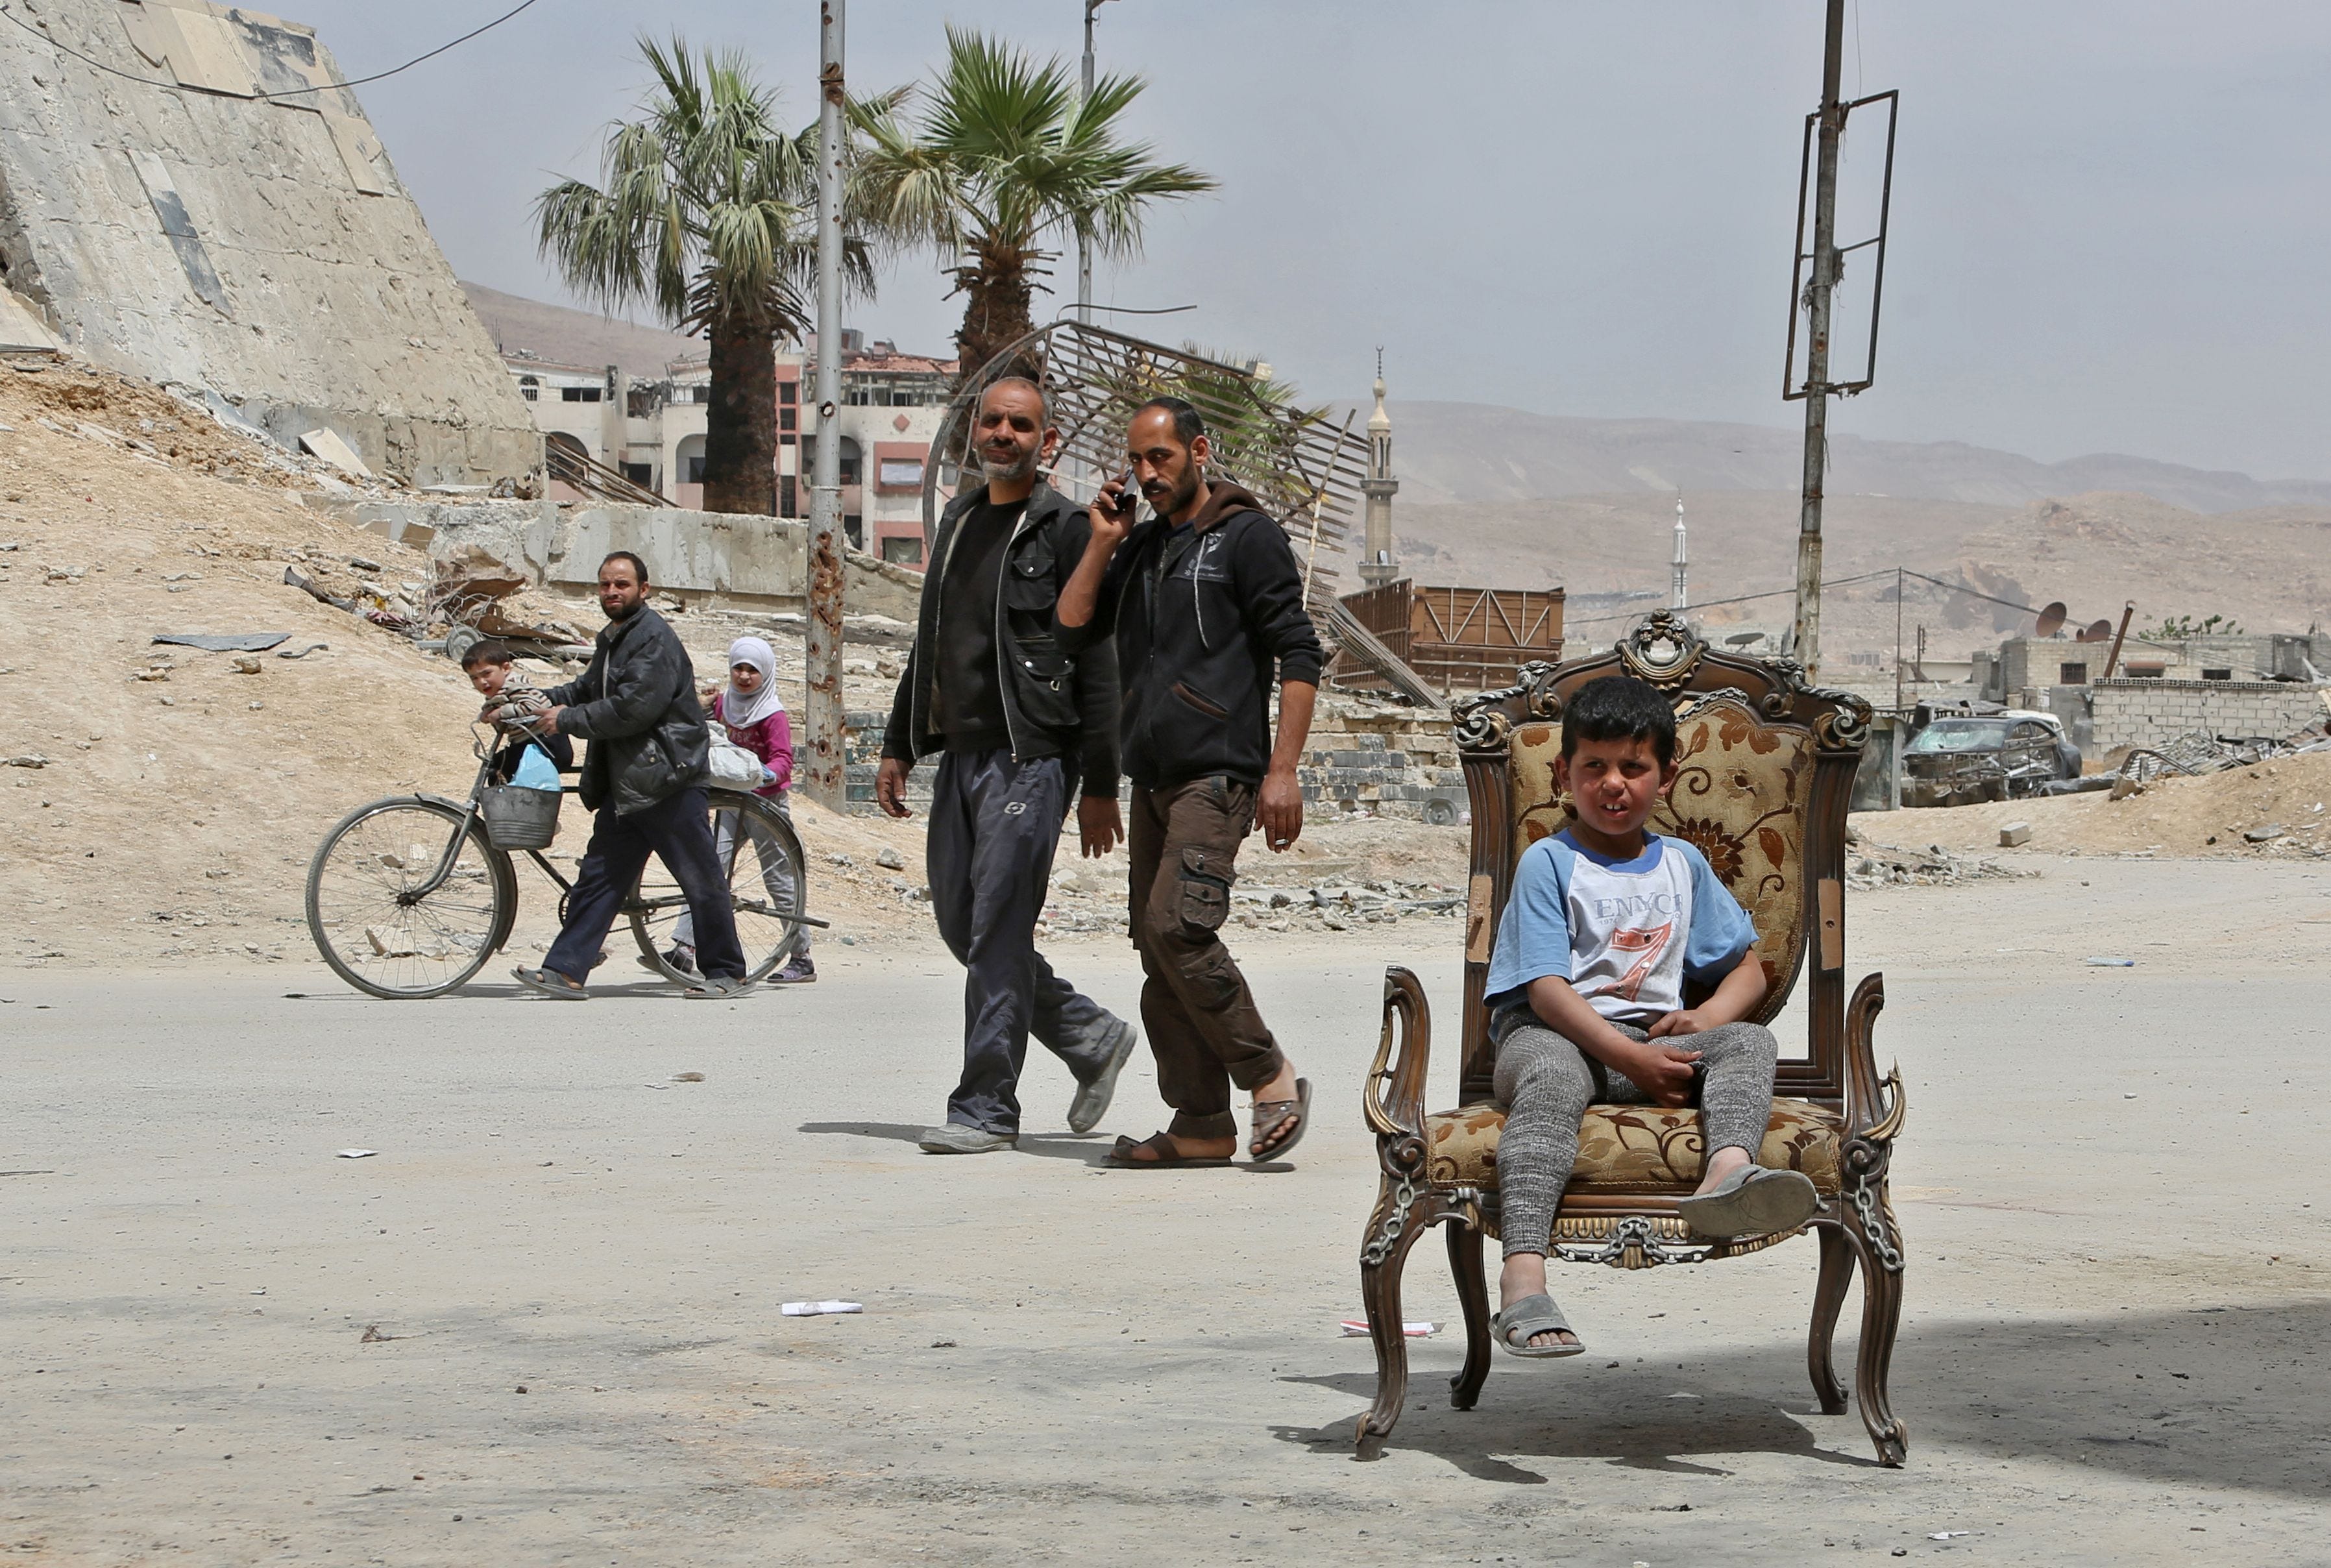 Civilians walk in the former rebel Syrian town of Douma on the outskirts of Damascus on April 17, 2018, after the Syrian army declared that all anti-regime forces have left Eastern Ghouta, following a blistering two month offensive on the rebel encla